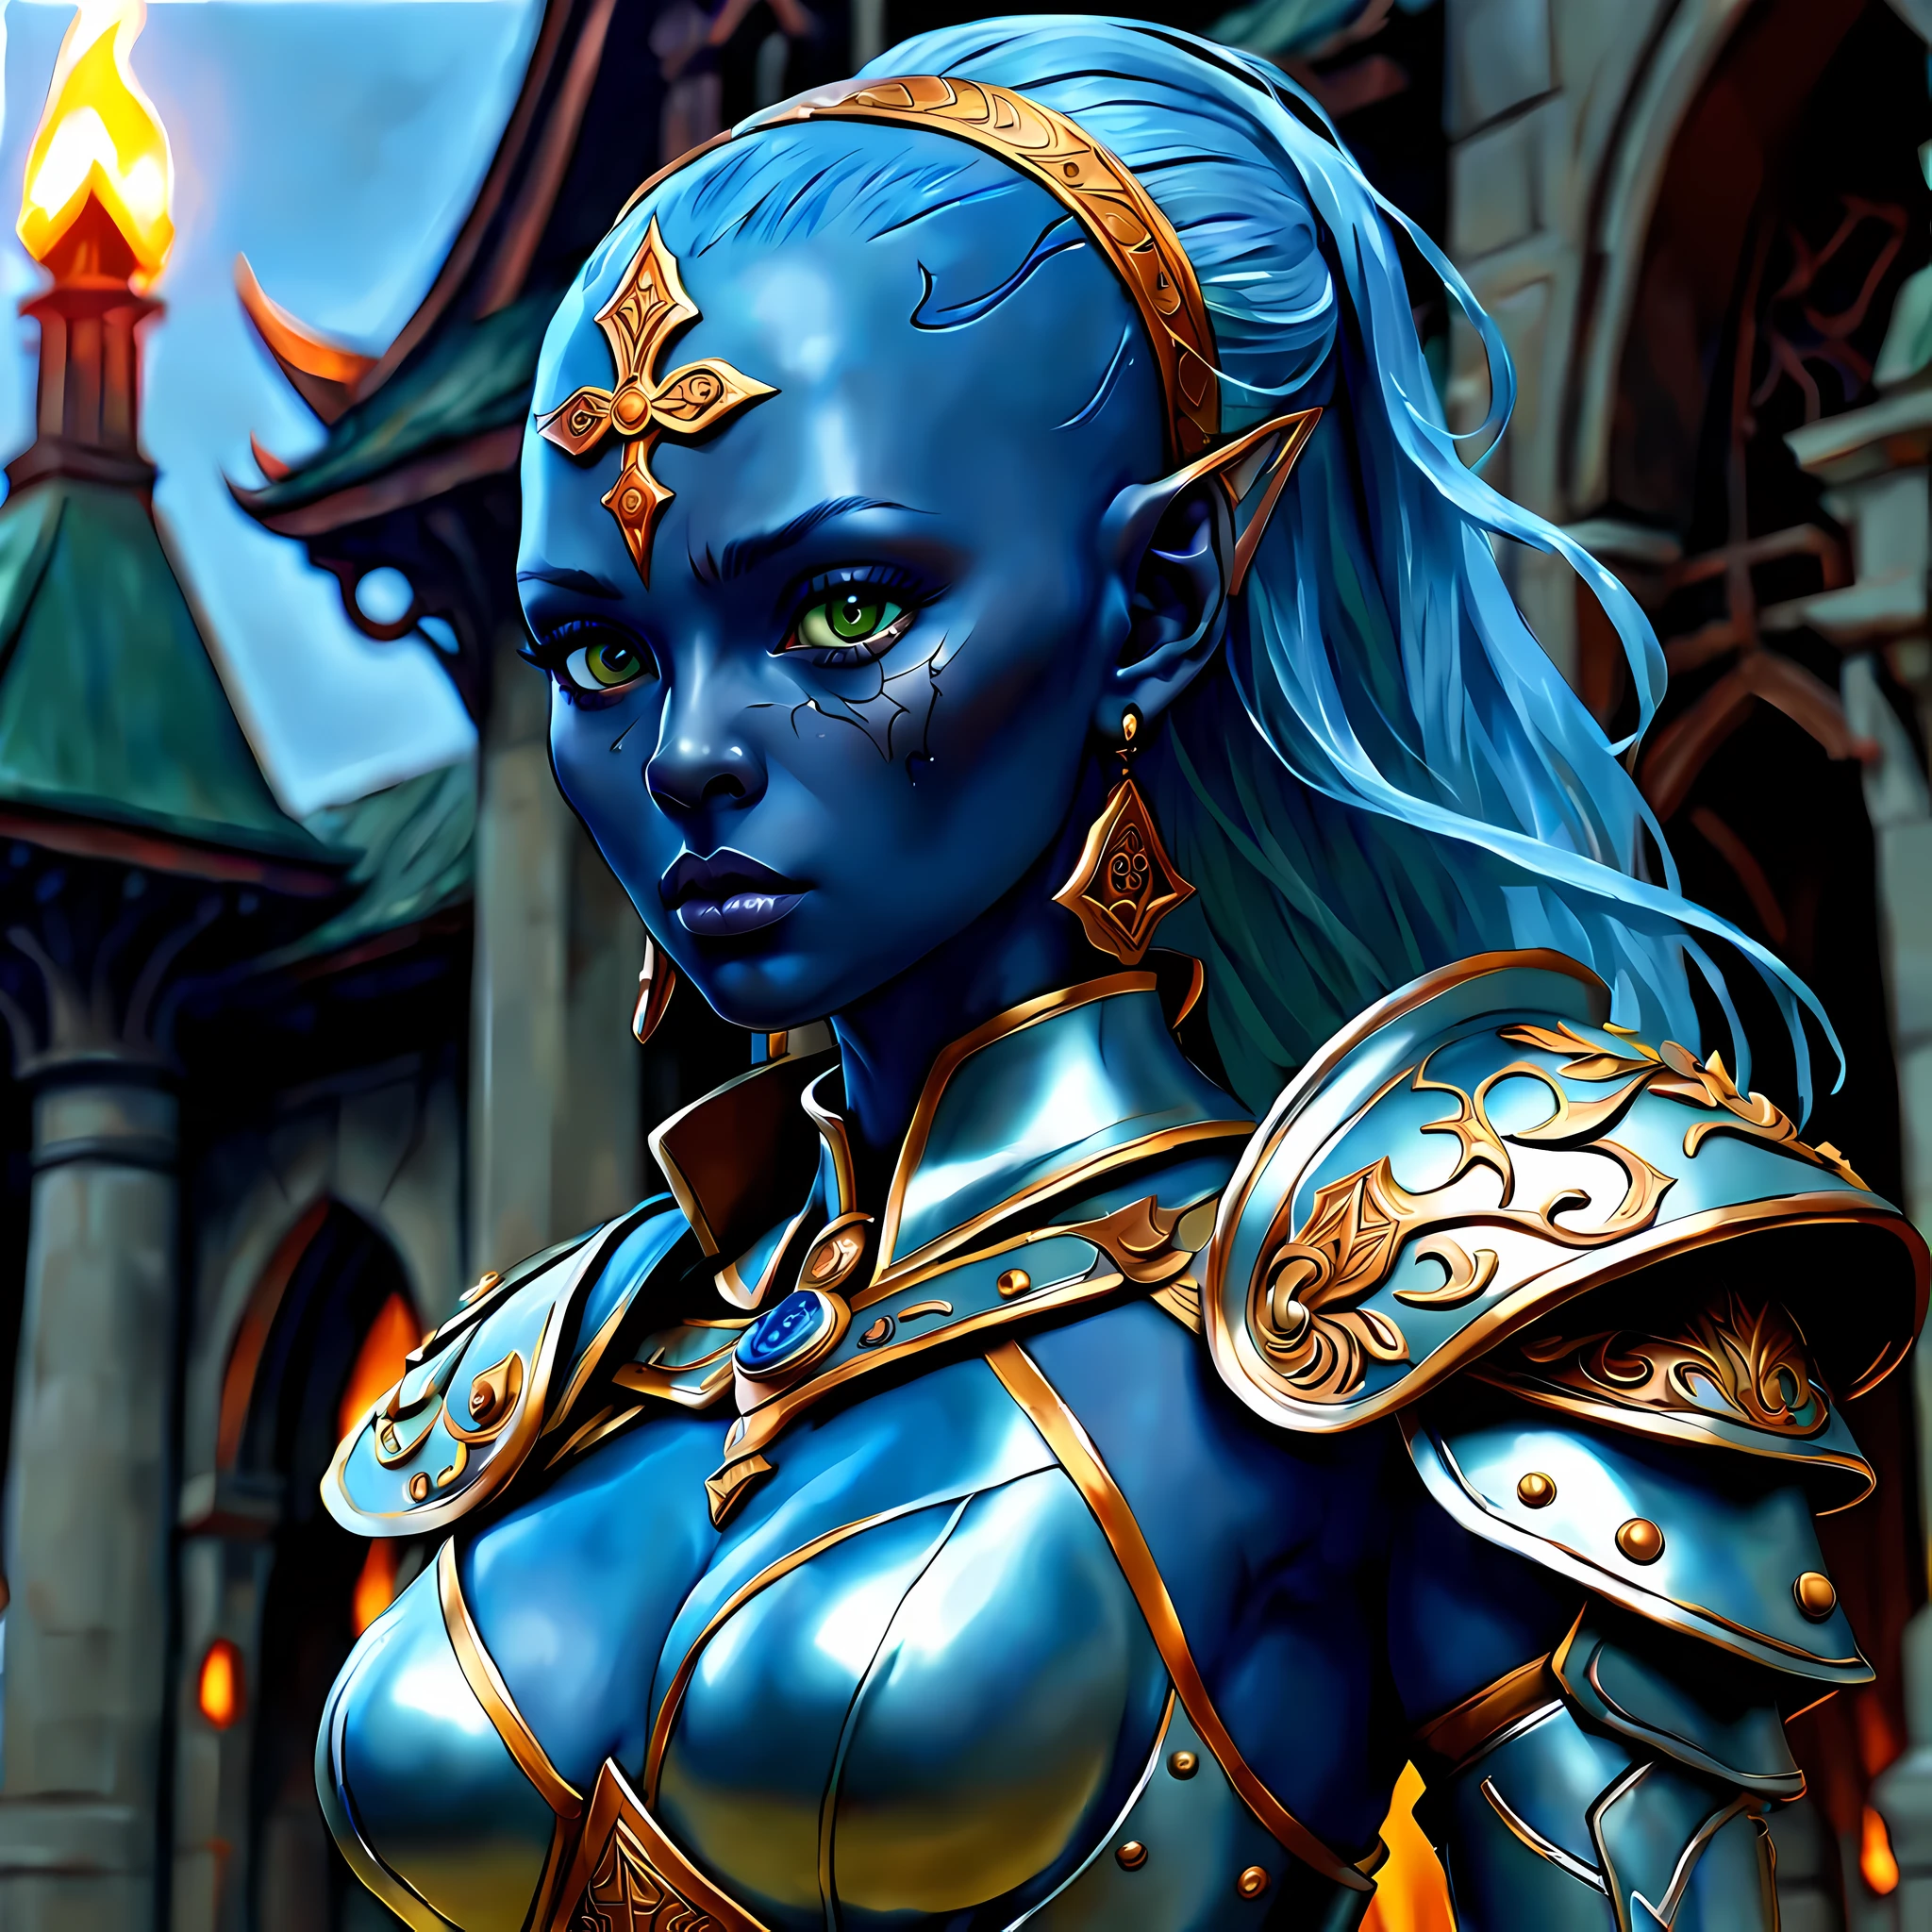 fAntAsy Art, dnd Art, RPG Art, Weitwinkelaufnahme, (mAsterpiece: 1.4) A (portrAit: 1.3) intense detAils, highly detAiled, photoreAlistic, best quAlity, highres, portrAit A femAle (fAntAsy Art, MAsterpiece, best quAlity: 1.3) ((Blau skin: 1.5)), intense detAils fAciAl detAils, exquisite beAuty, (fAntAsy Art, MAsterpiece, best quAlity) Kleriker, (Blau: 1.3) skinned femAle, bAld heAd, (no eArs: 1.5), (Grün: 1.3) Auge, fAntAsy Art, MAsterpiece, best quAlity) Armed A fiery sword red fire, weAring heAvy (Weiß: 1.3) hAlf plAte mAil Armor, weAring high heeled lAced boots, weAring An(orAnge :1.3) cloAk, weAring glowing holy symbol GlowingRunes_Gelb, within fAntAsy temple bAckground, Reflexionslicht, high detAils, best quAlity, 16k, [ultrA detAiled], mAsterpiece, best quAlity, (extremely detAiled), Nahaufnahme, ultrA Weitwinkelaufnahme, photoreAlistic, Roh, fAntAsy Art, dnd Art, fAntAsy Art, reAlistic Art,((best quAlity)), ((mAsterpiece)), (detAiled), perfect fAce, 